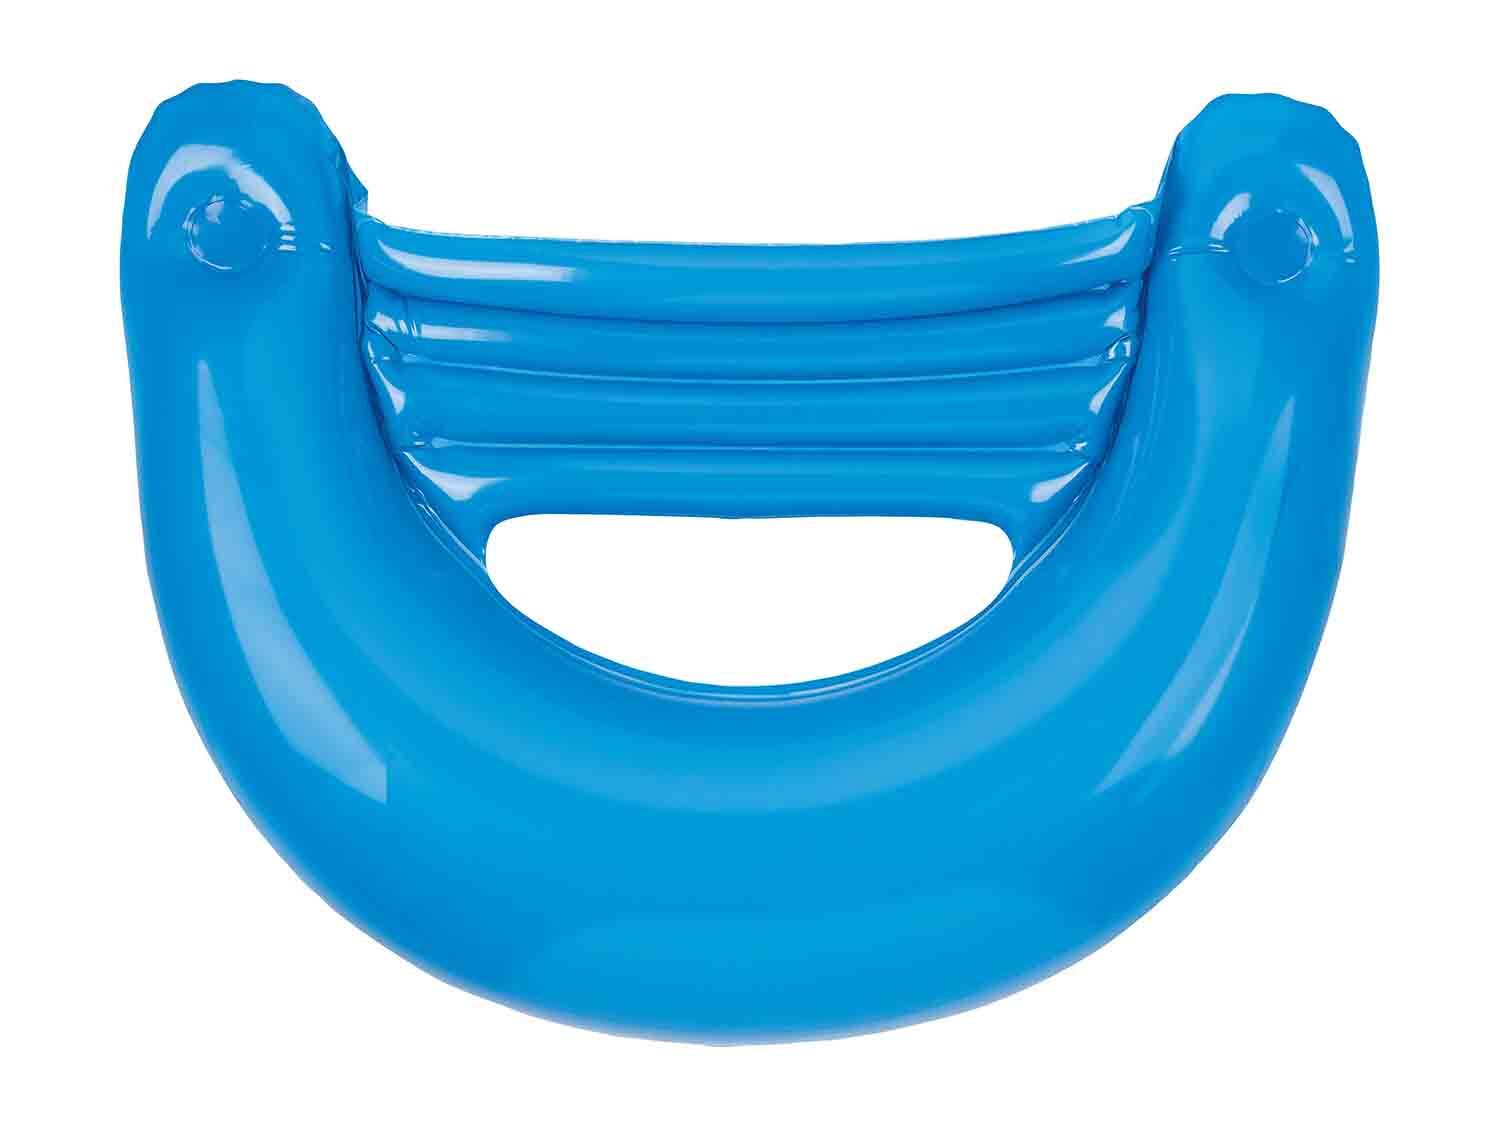 Hamaca inflable